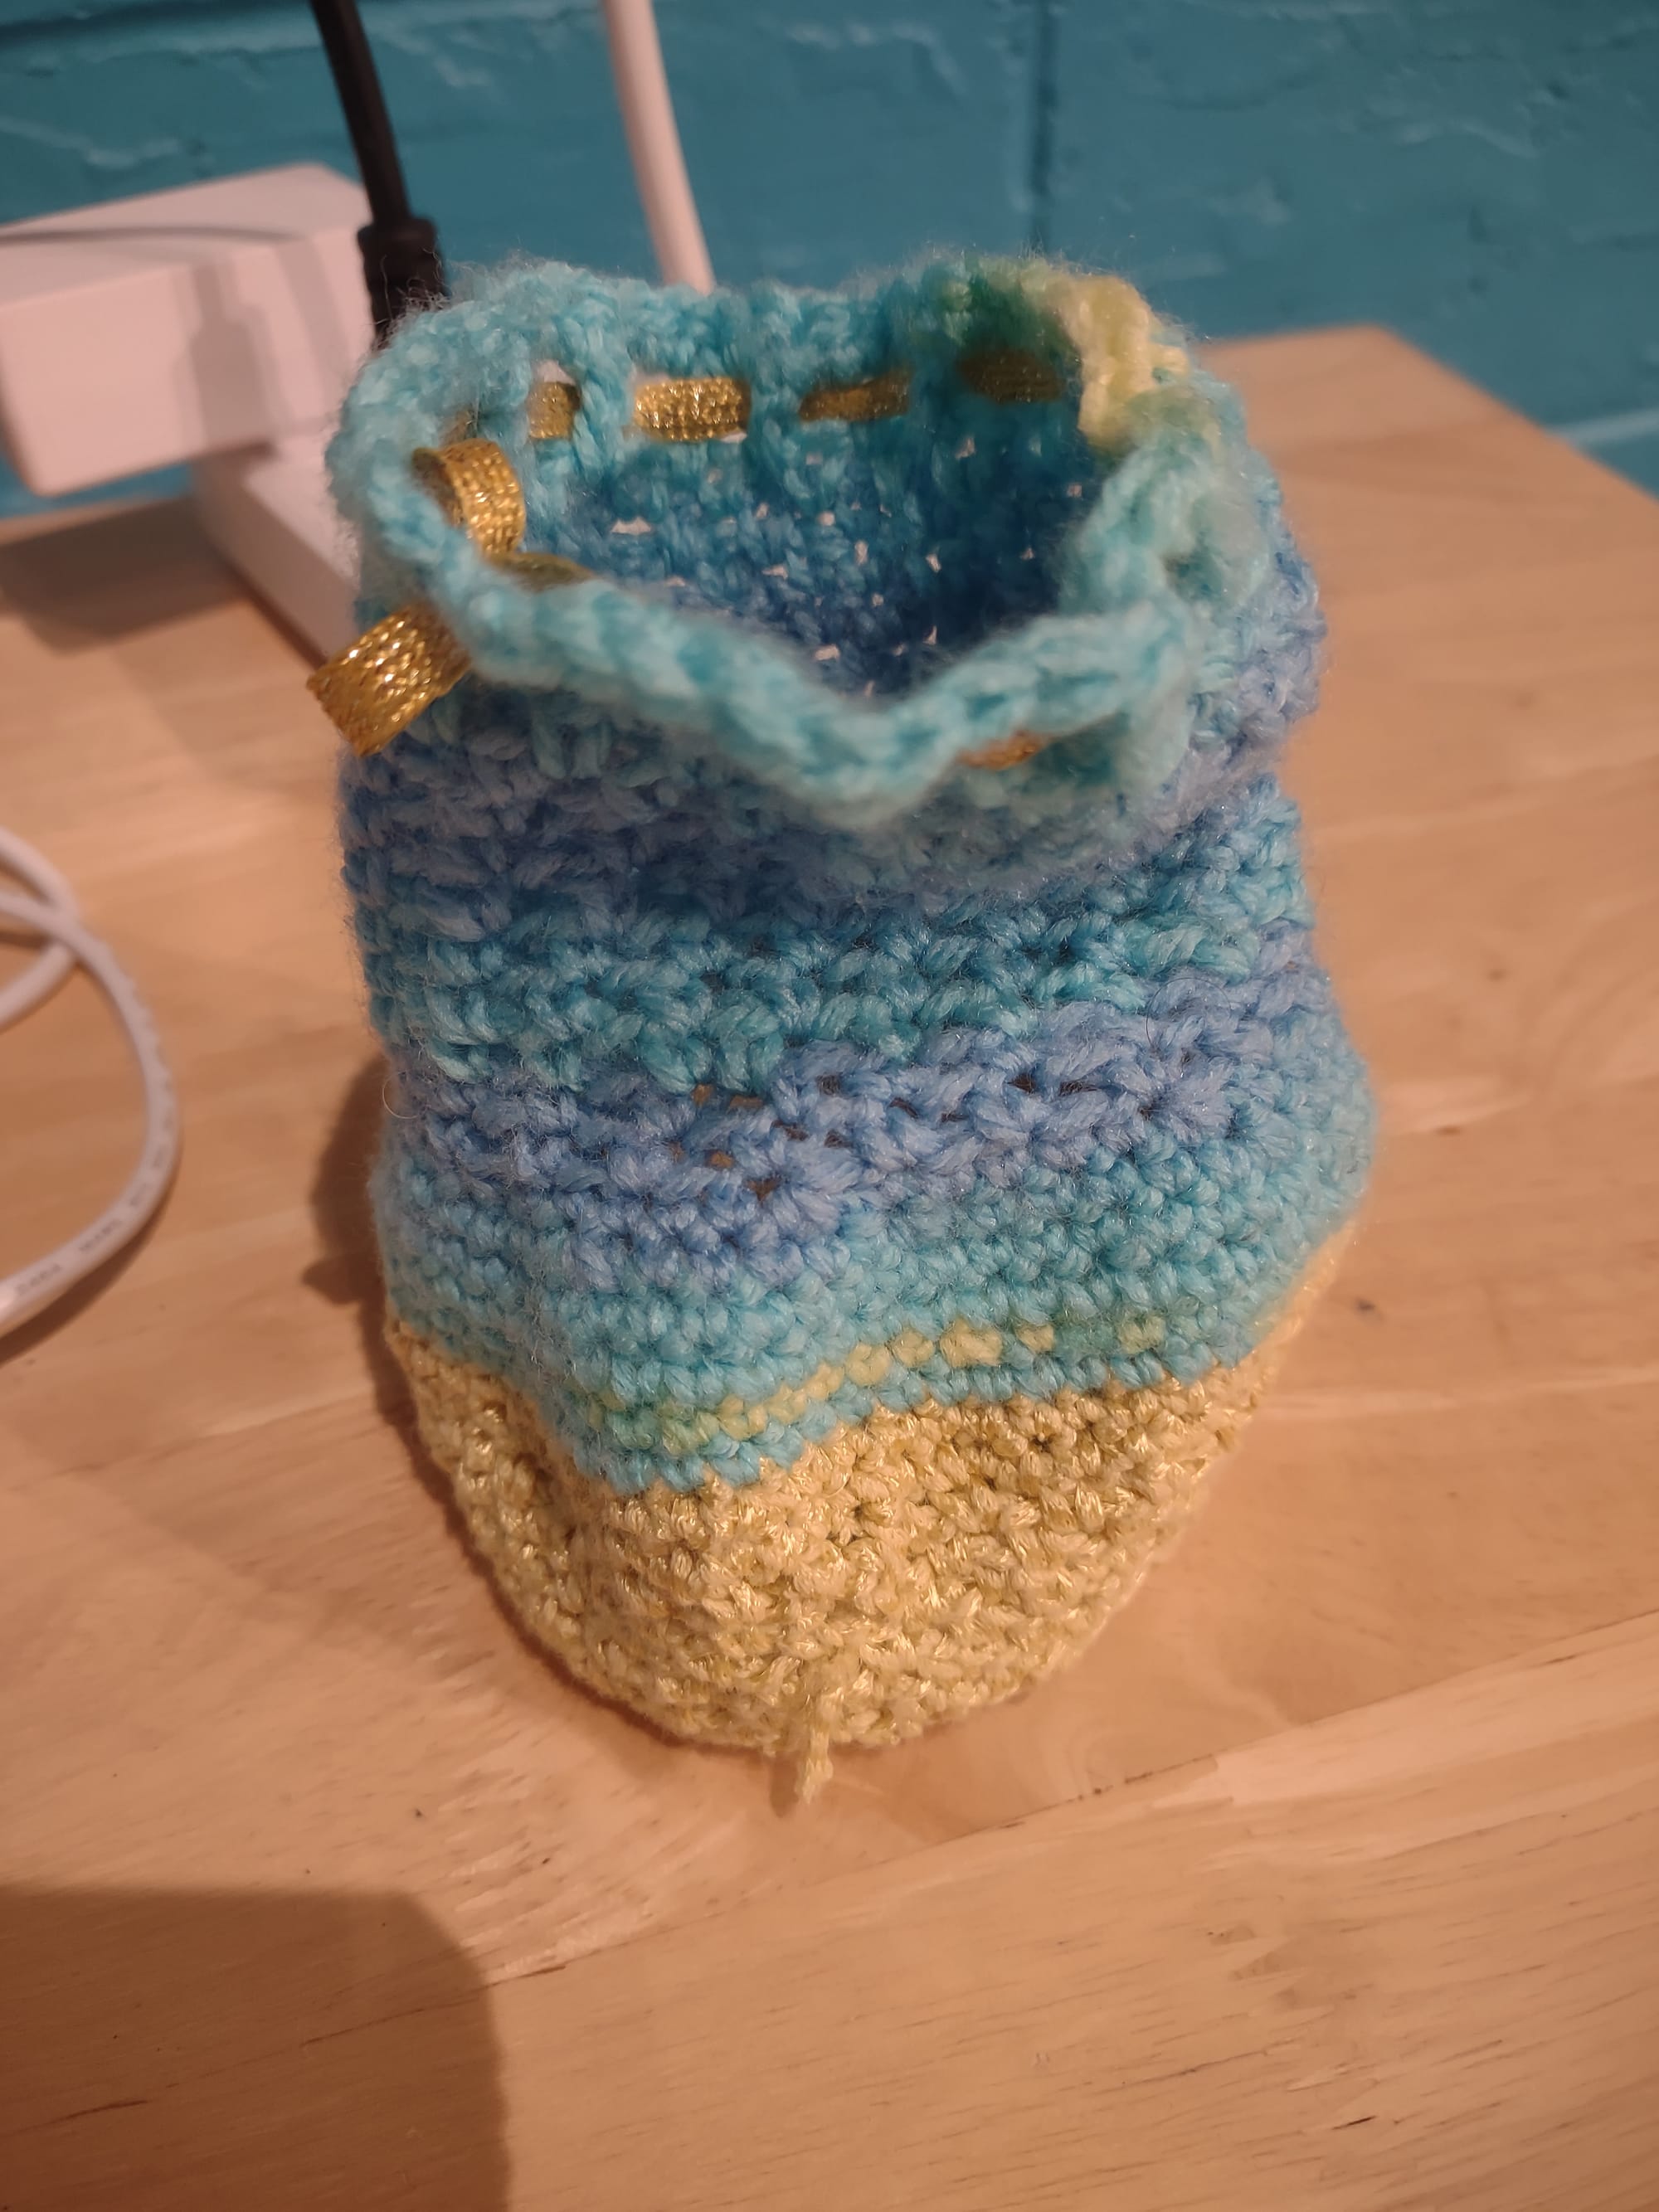 A pouch made of shiny yellow yarn at the bottom and then the rest in a yarn that's a gradient of light blue tones with a few yellow spots. There's a gold cord strung through a series of holes at the top to make a drawstring. It's sitting on a wooden table next to a power strip.